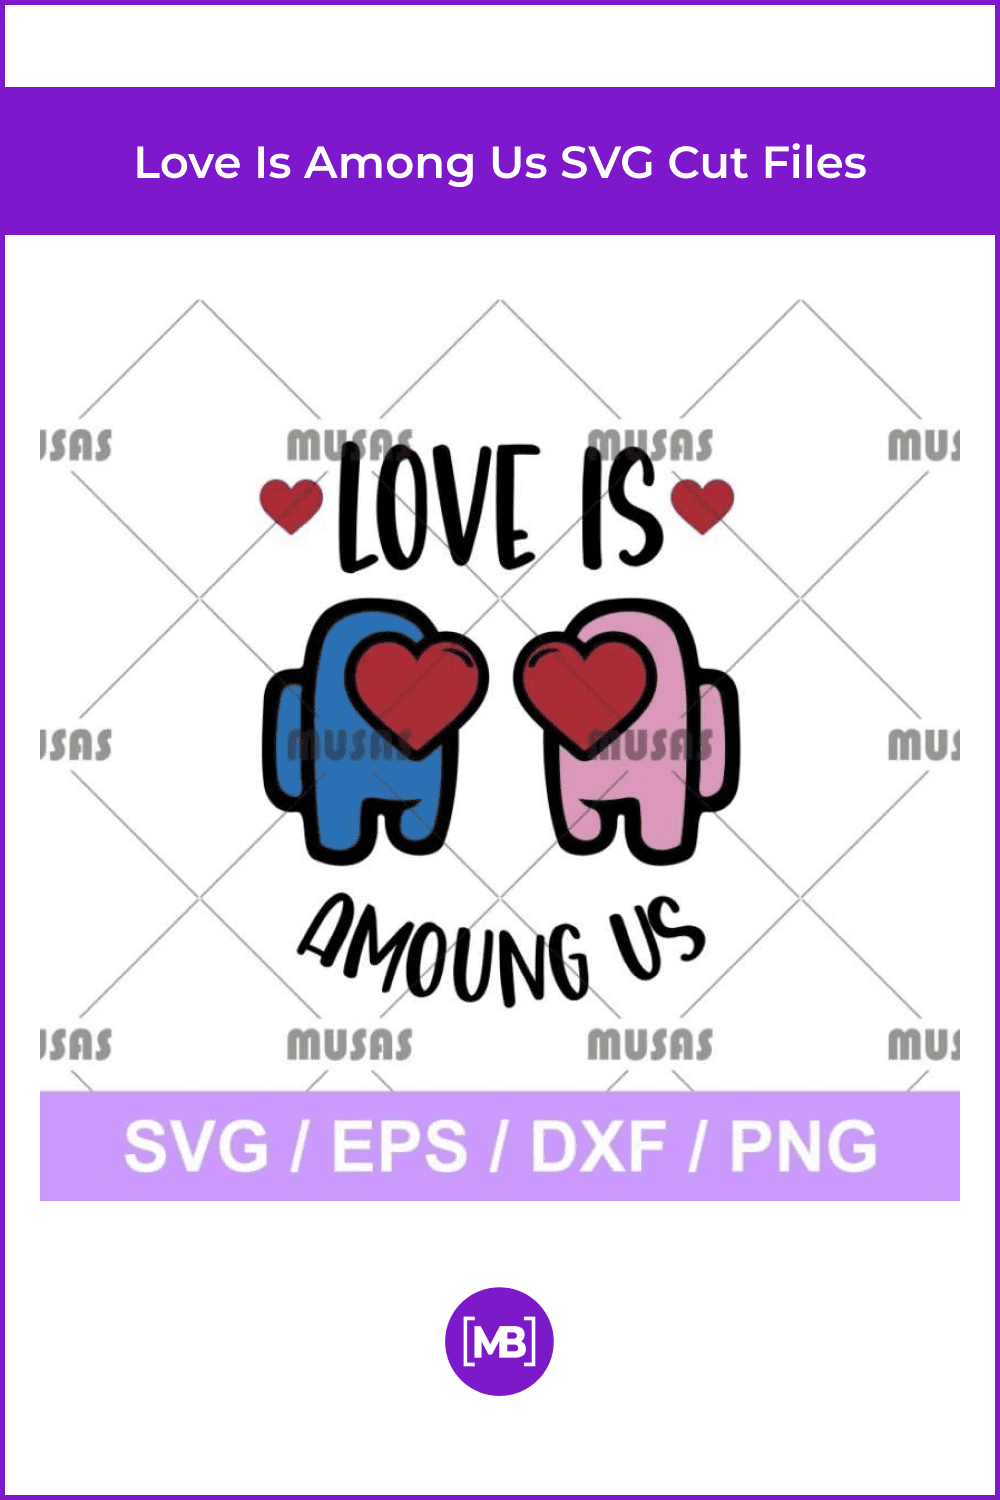 Love is among us SVG cut files.